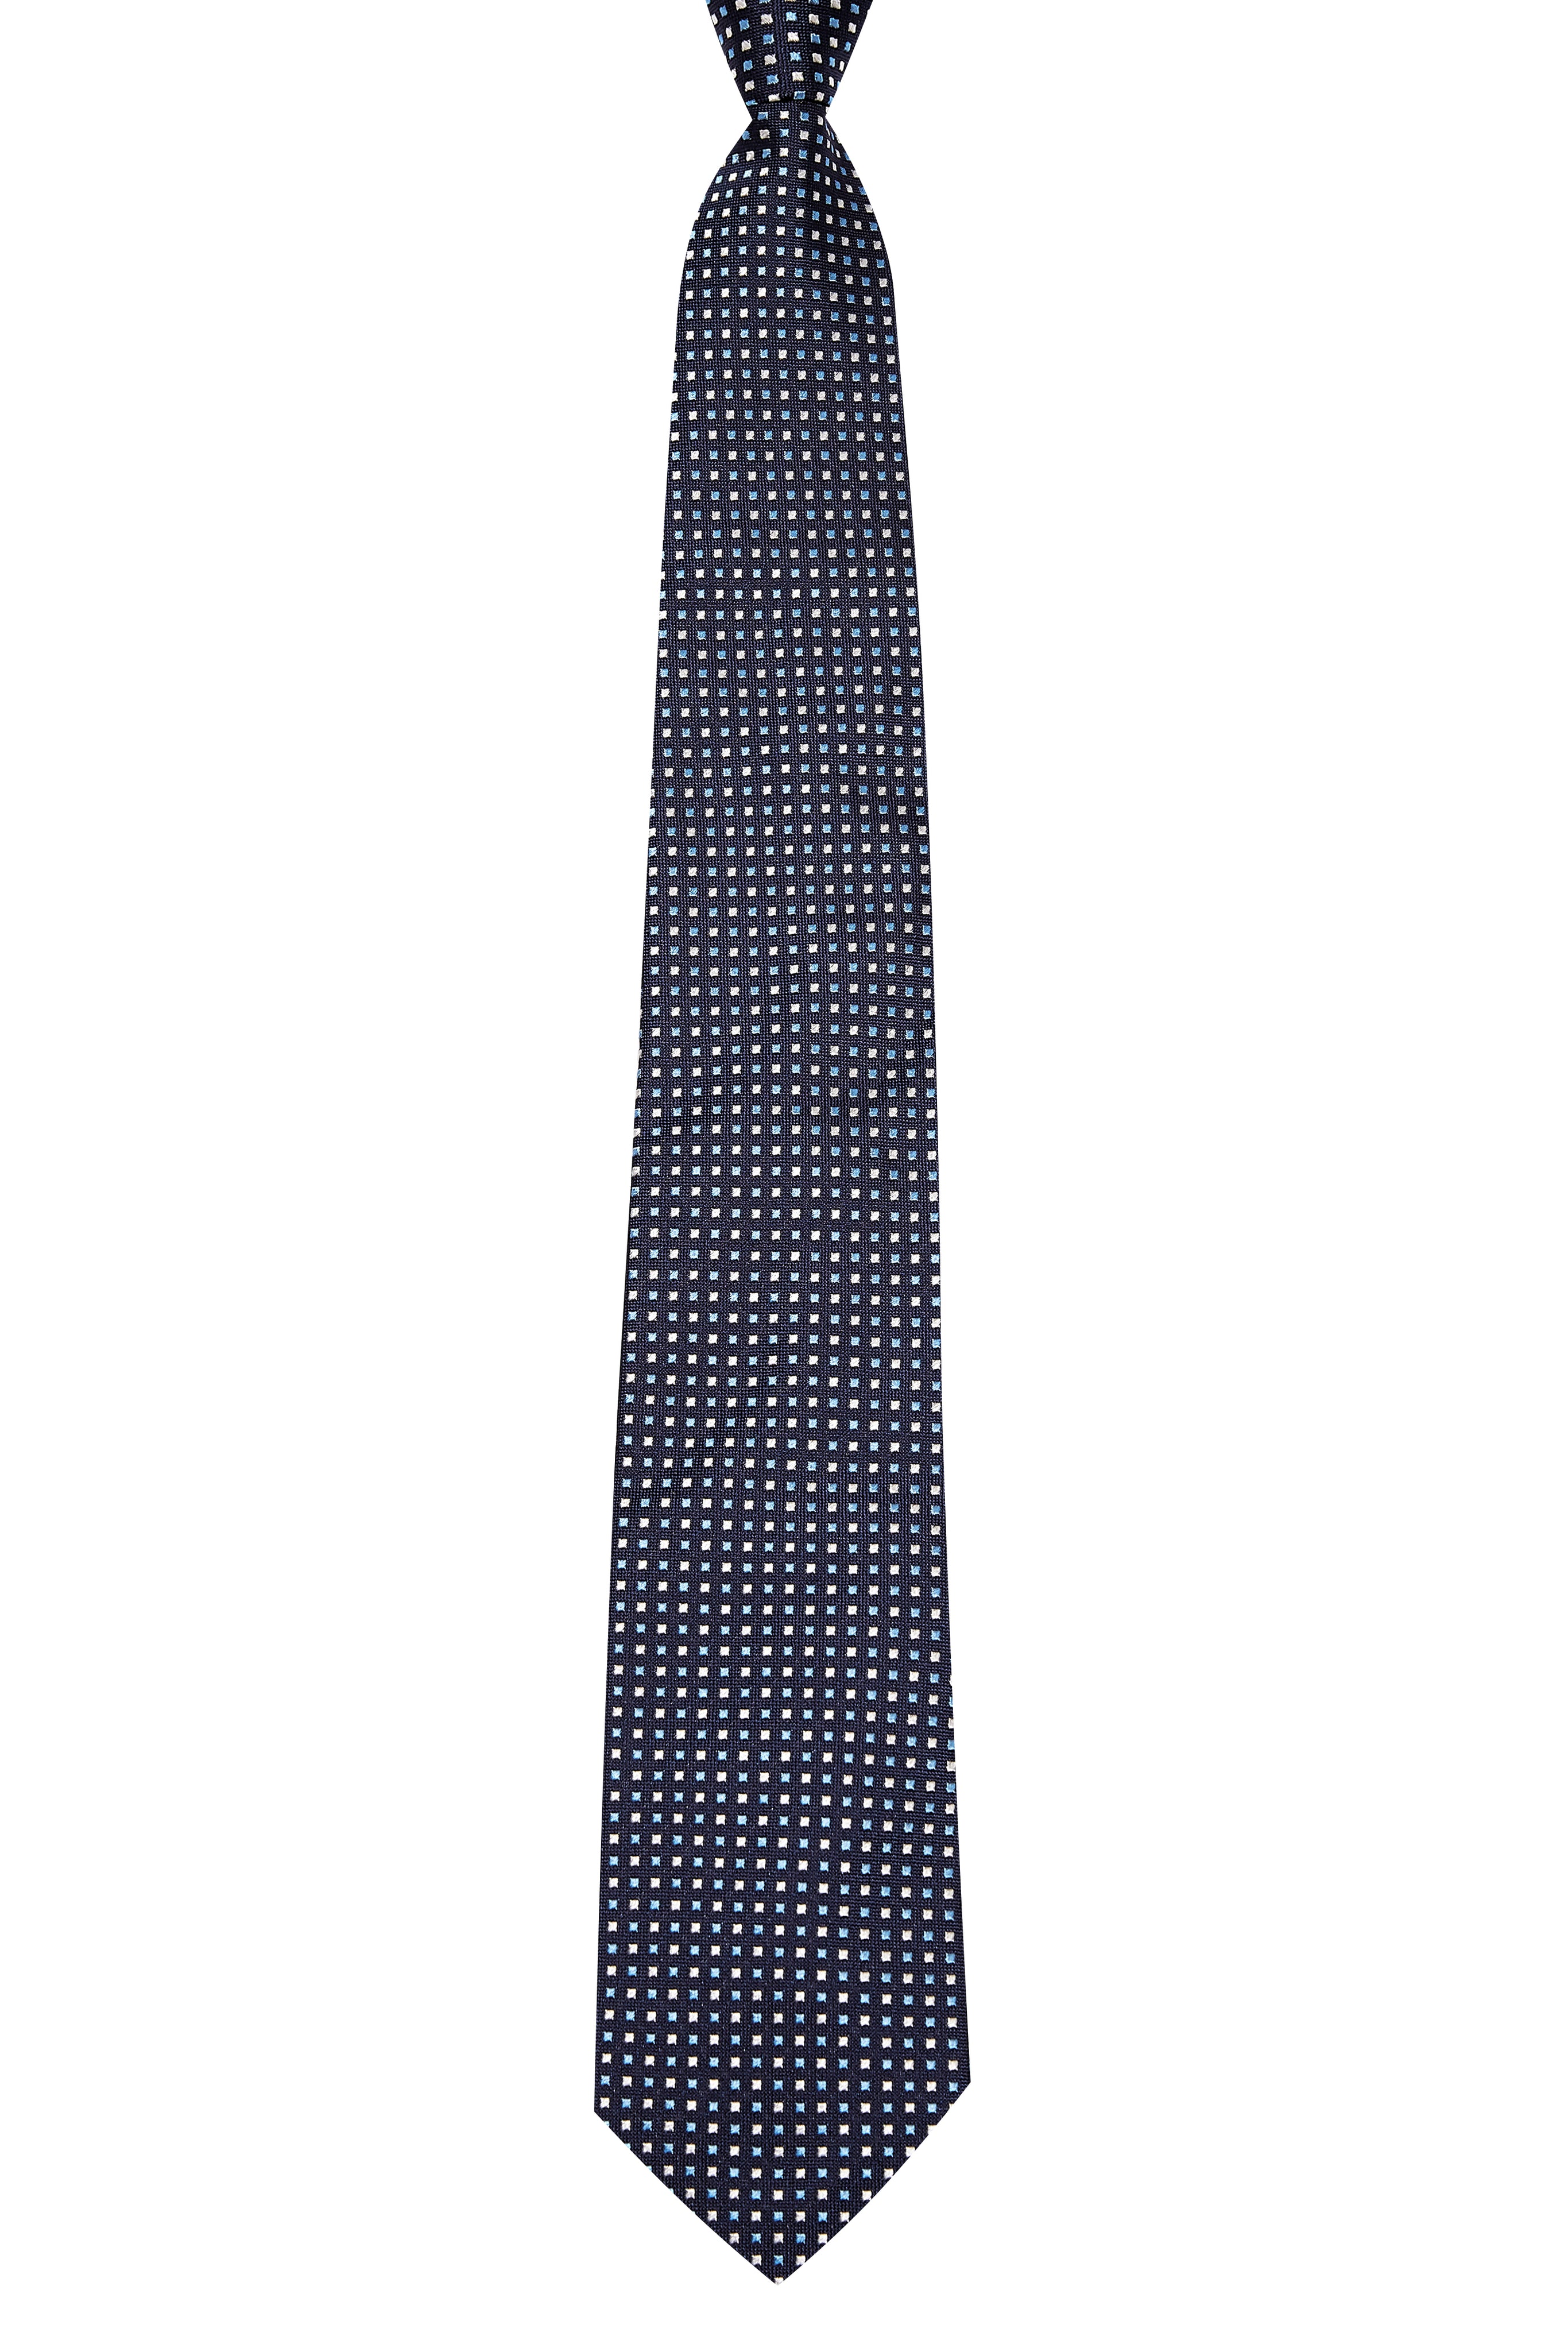 A Martin Greenfield Clothiers Tie